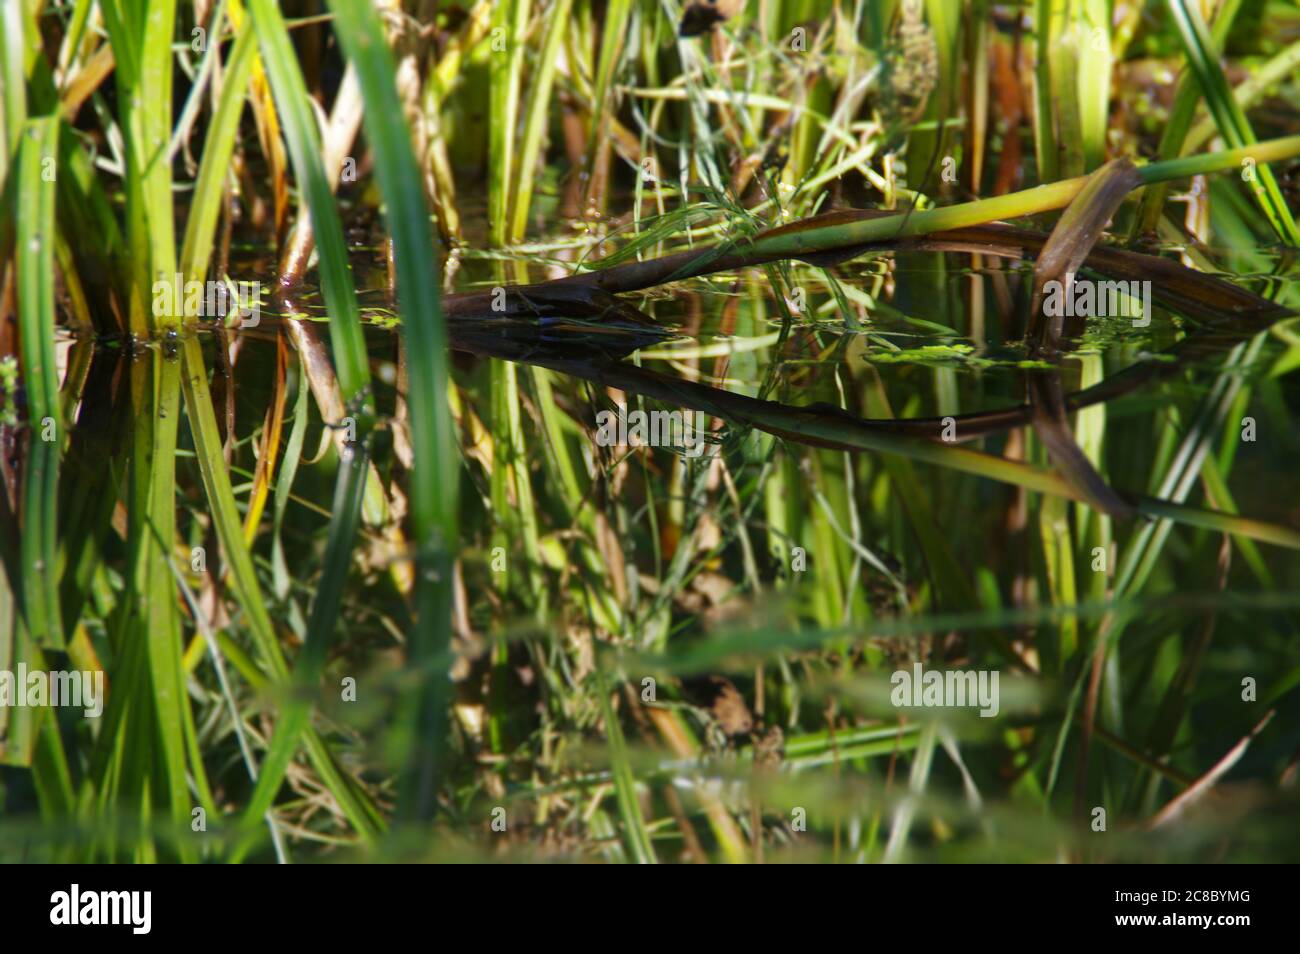 Natural wetland with the plants in water. Concept of nature, ecology and environment care. Restored water retention reservoirs. Green reeds in swamps Stock Photo